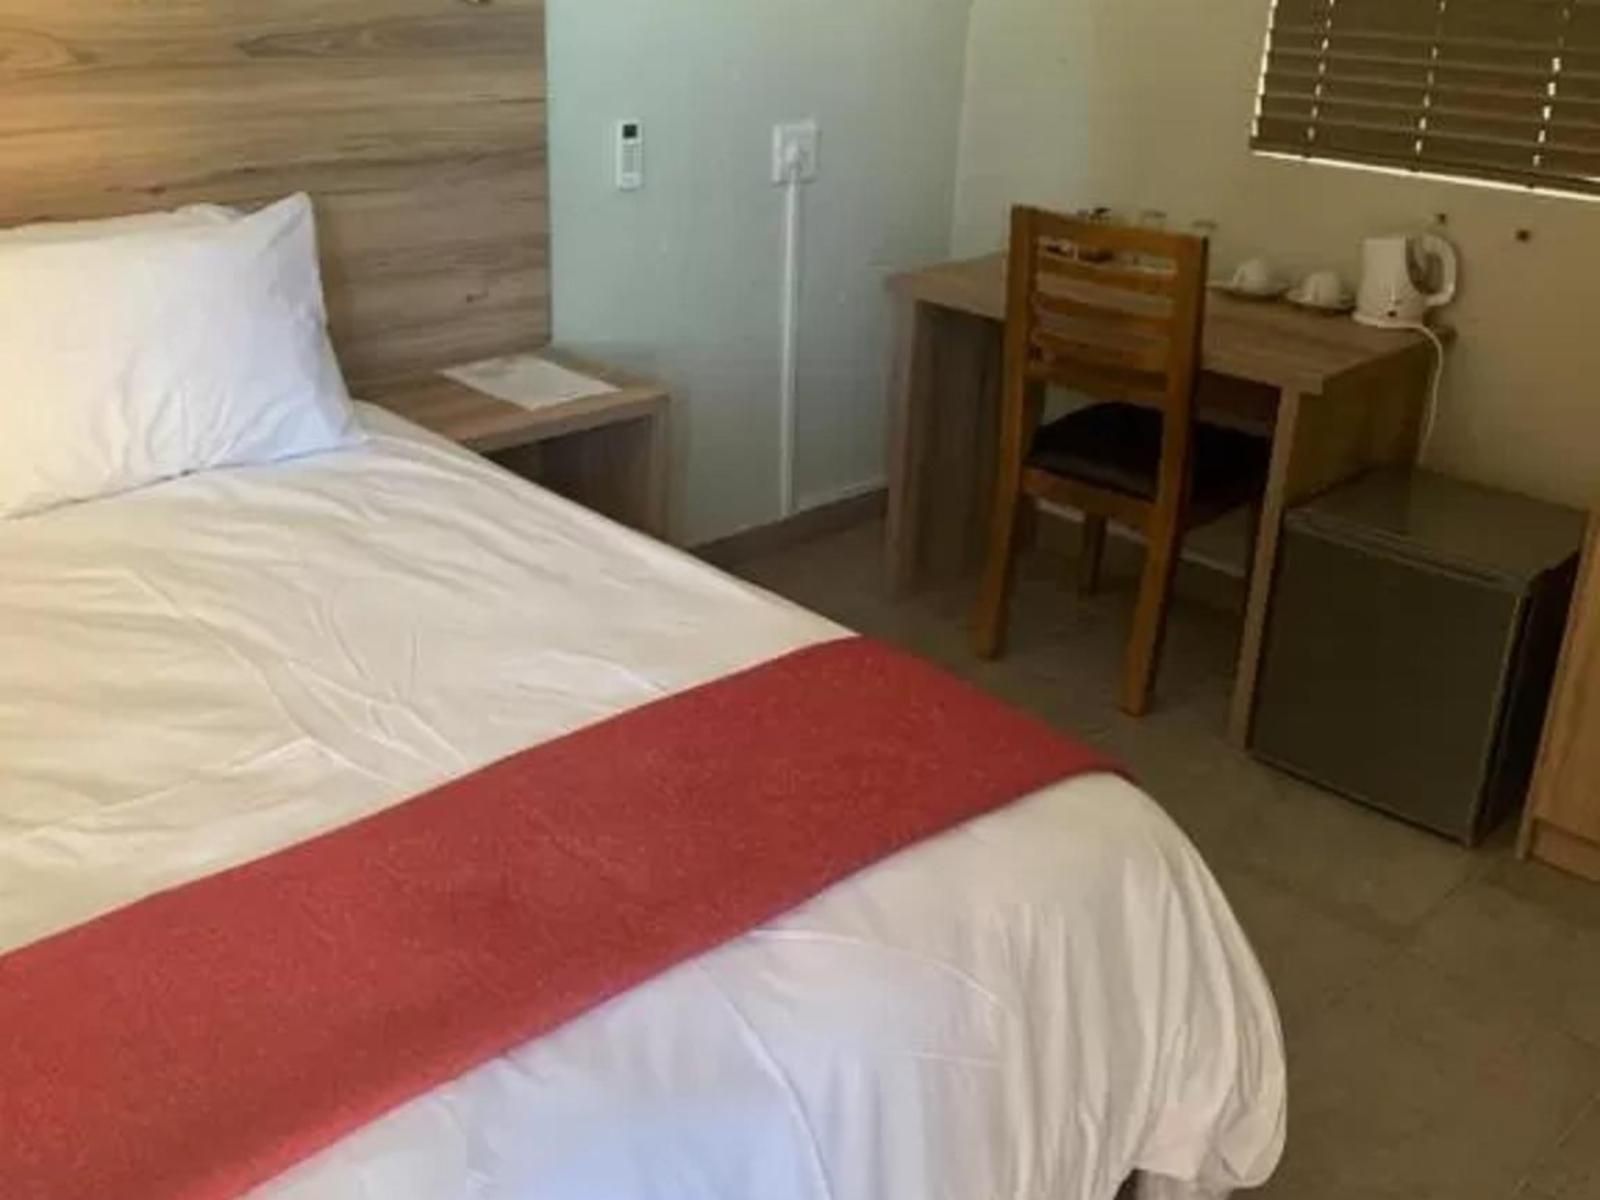 The Hill Hotel And Conference Centre Thohoyandou Limpopo Province South Africa Bedroom